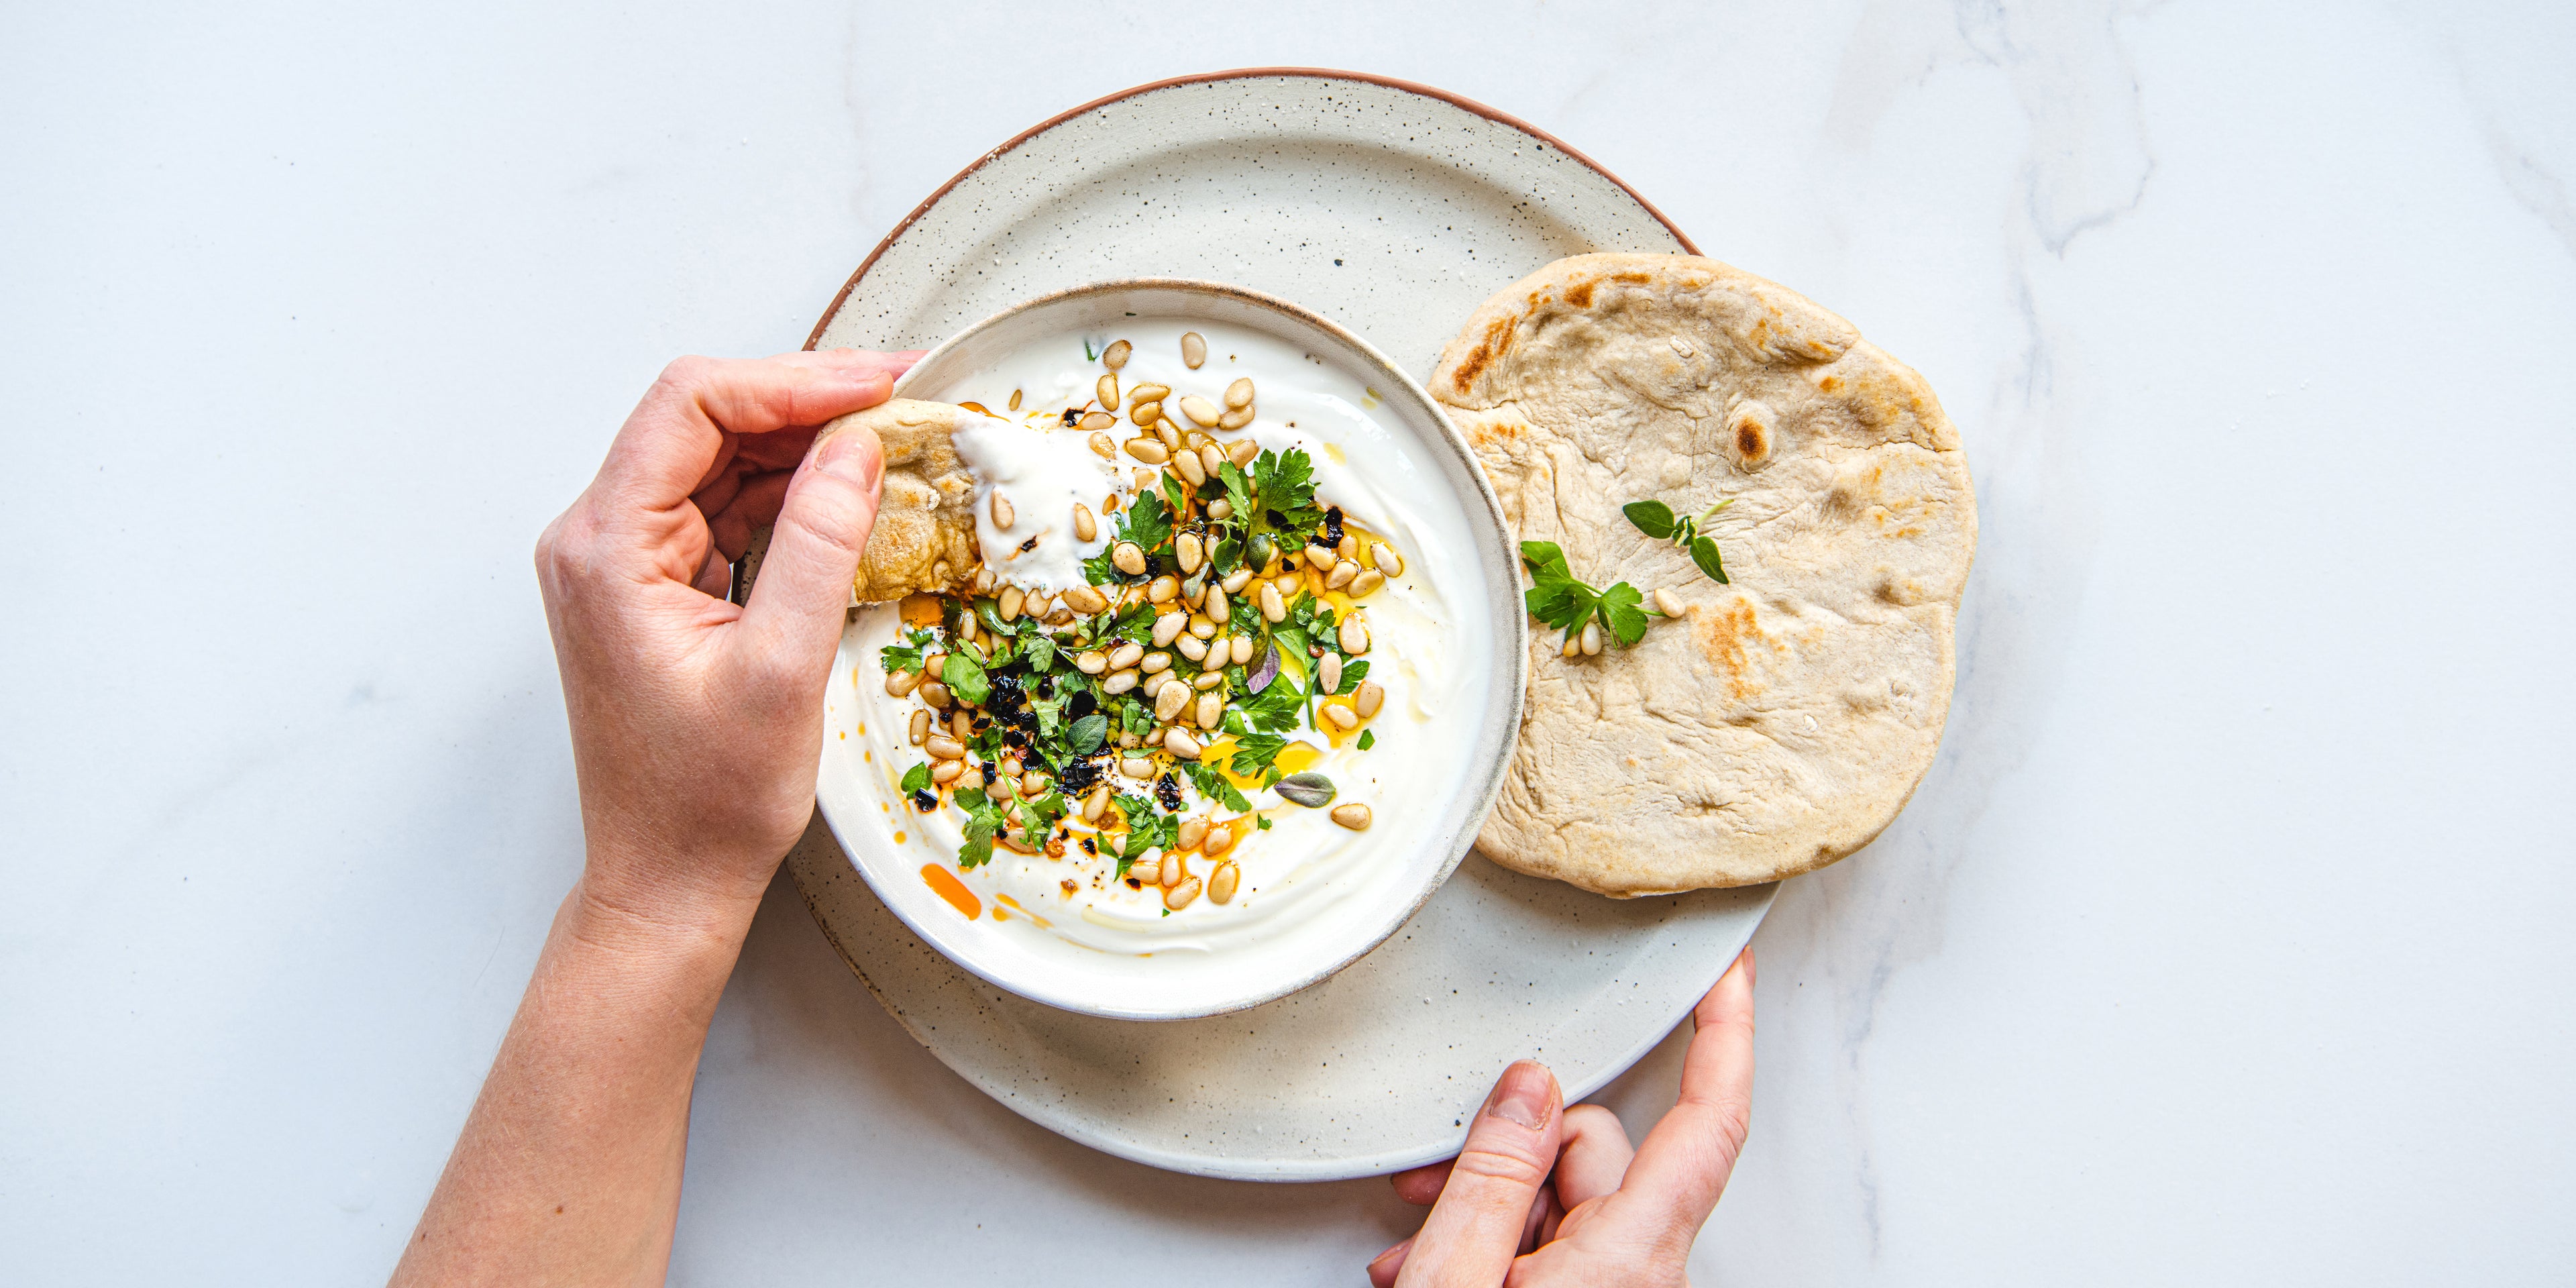 A top down view of a plate with a hand dipping a piece of Kefir flatbread into a bowl of tzatziki